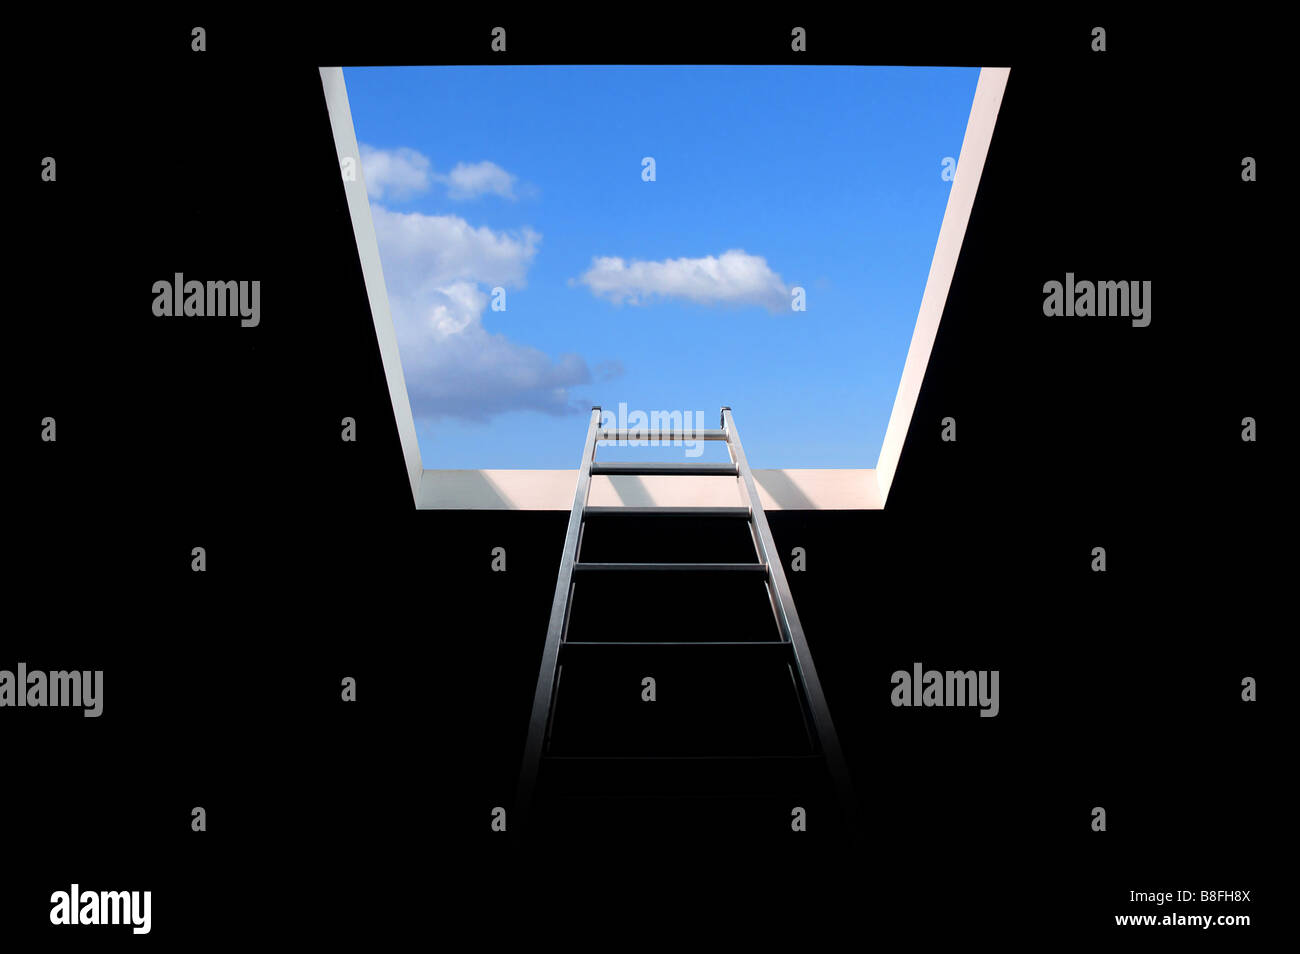 ladder leading to a bright blue sky signifying success and achievement Stock Photo